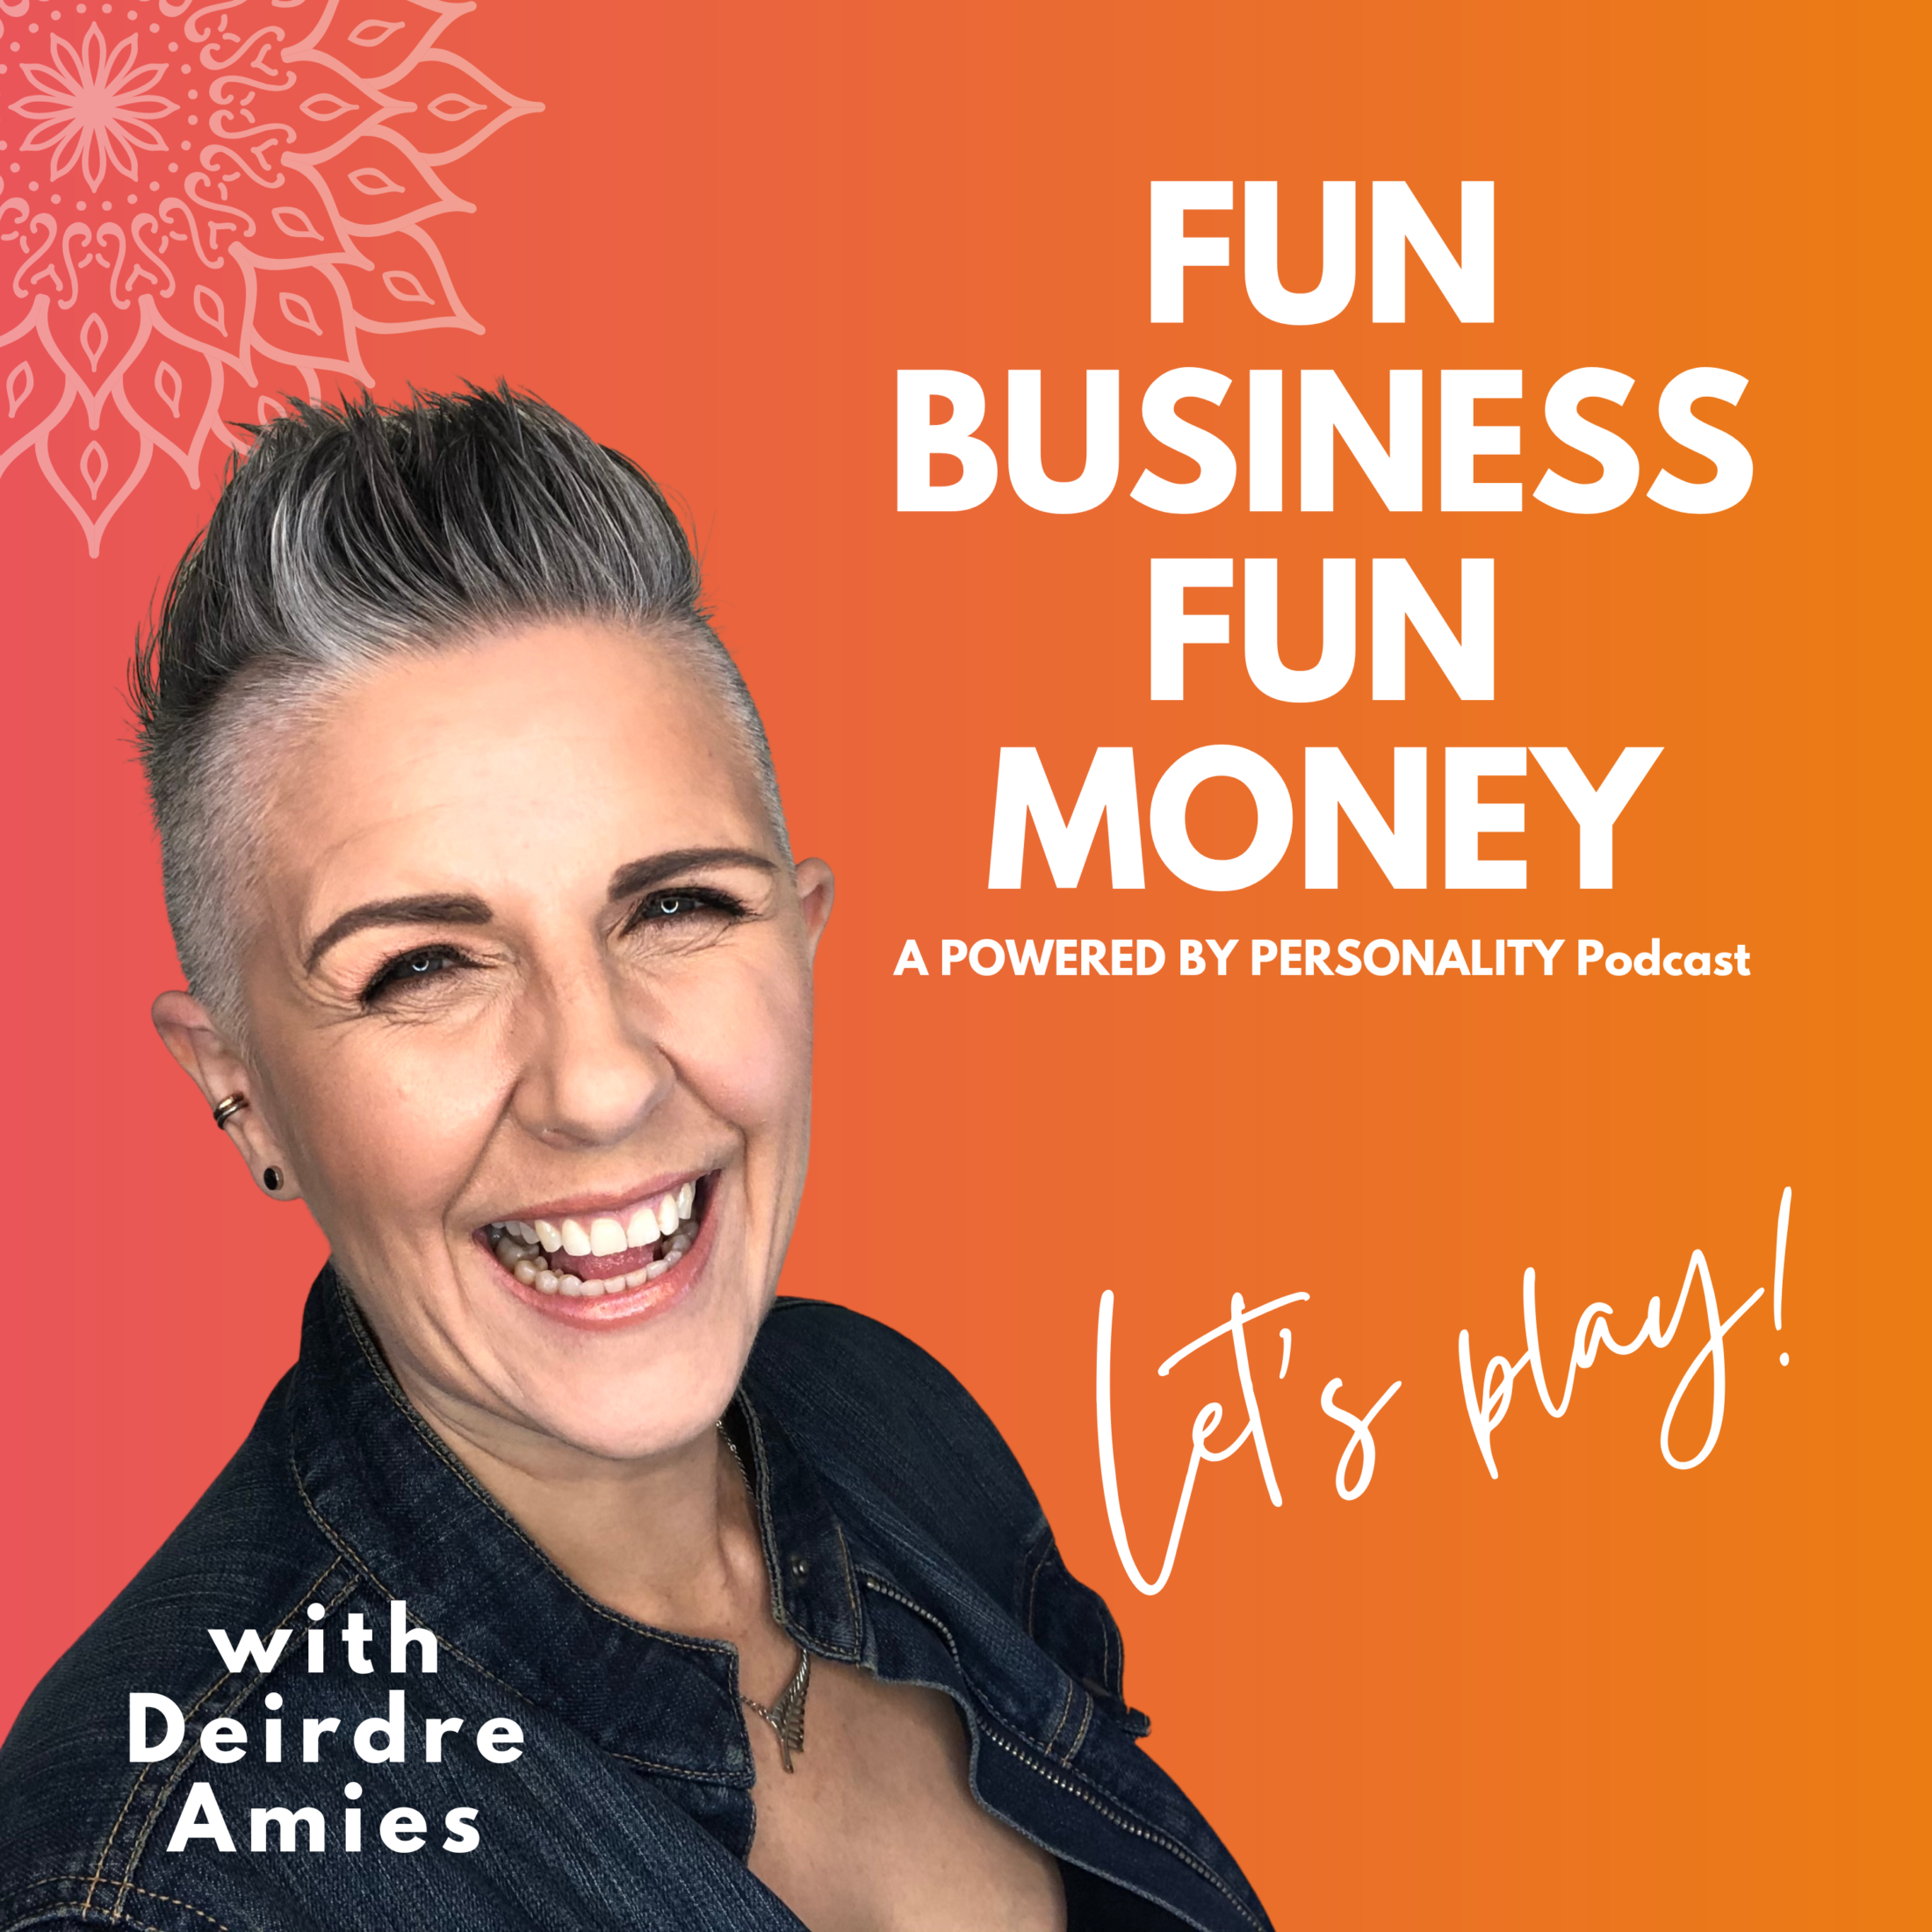 Fun Business Fun Money, a Powered by Personality podcast. With Deirdre Amies. Let's play! 